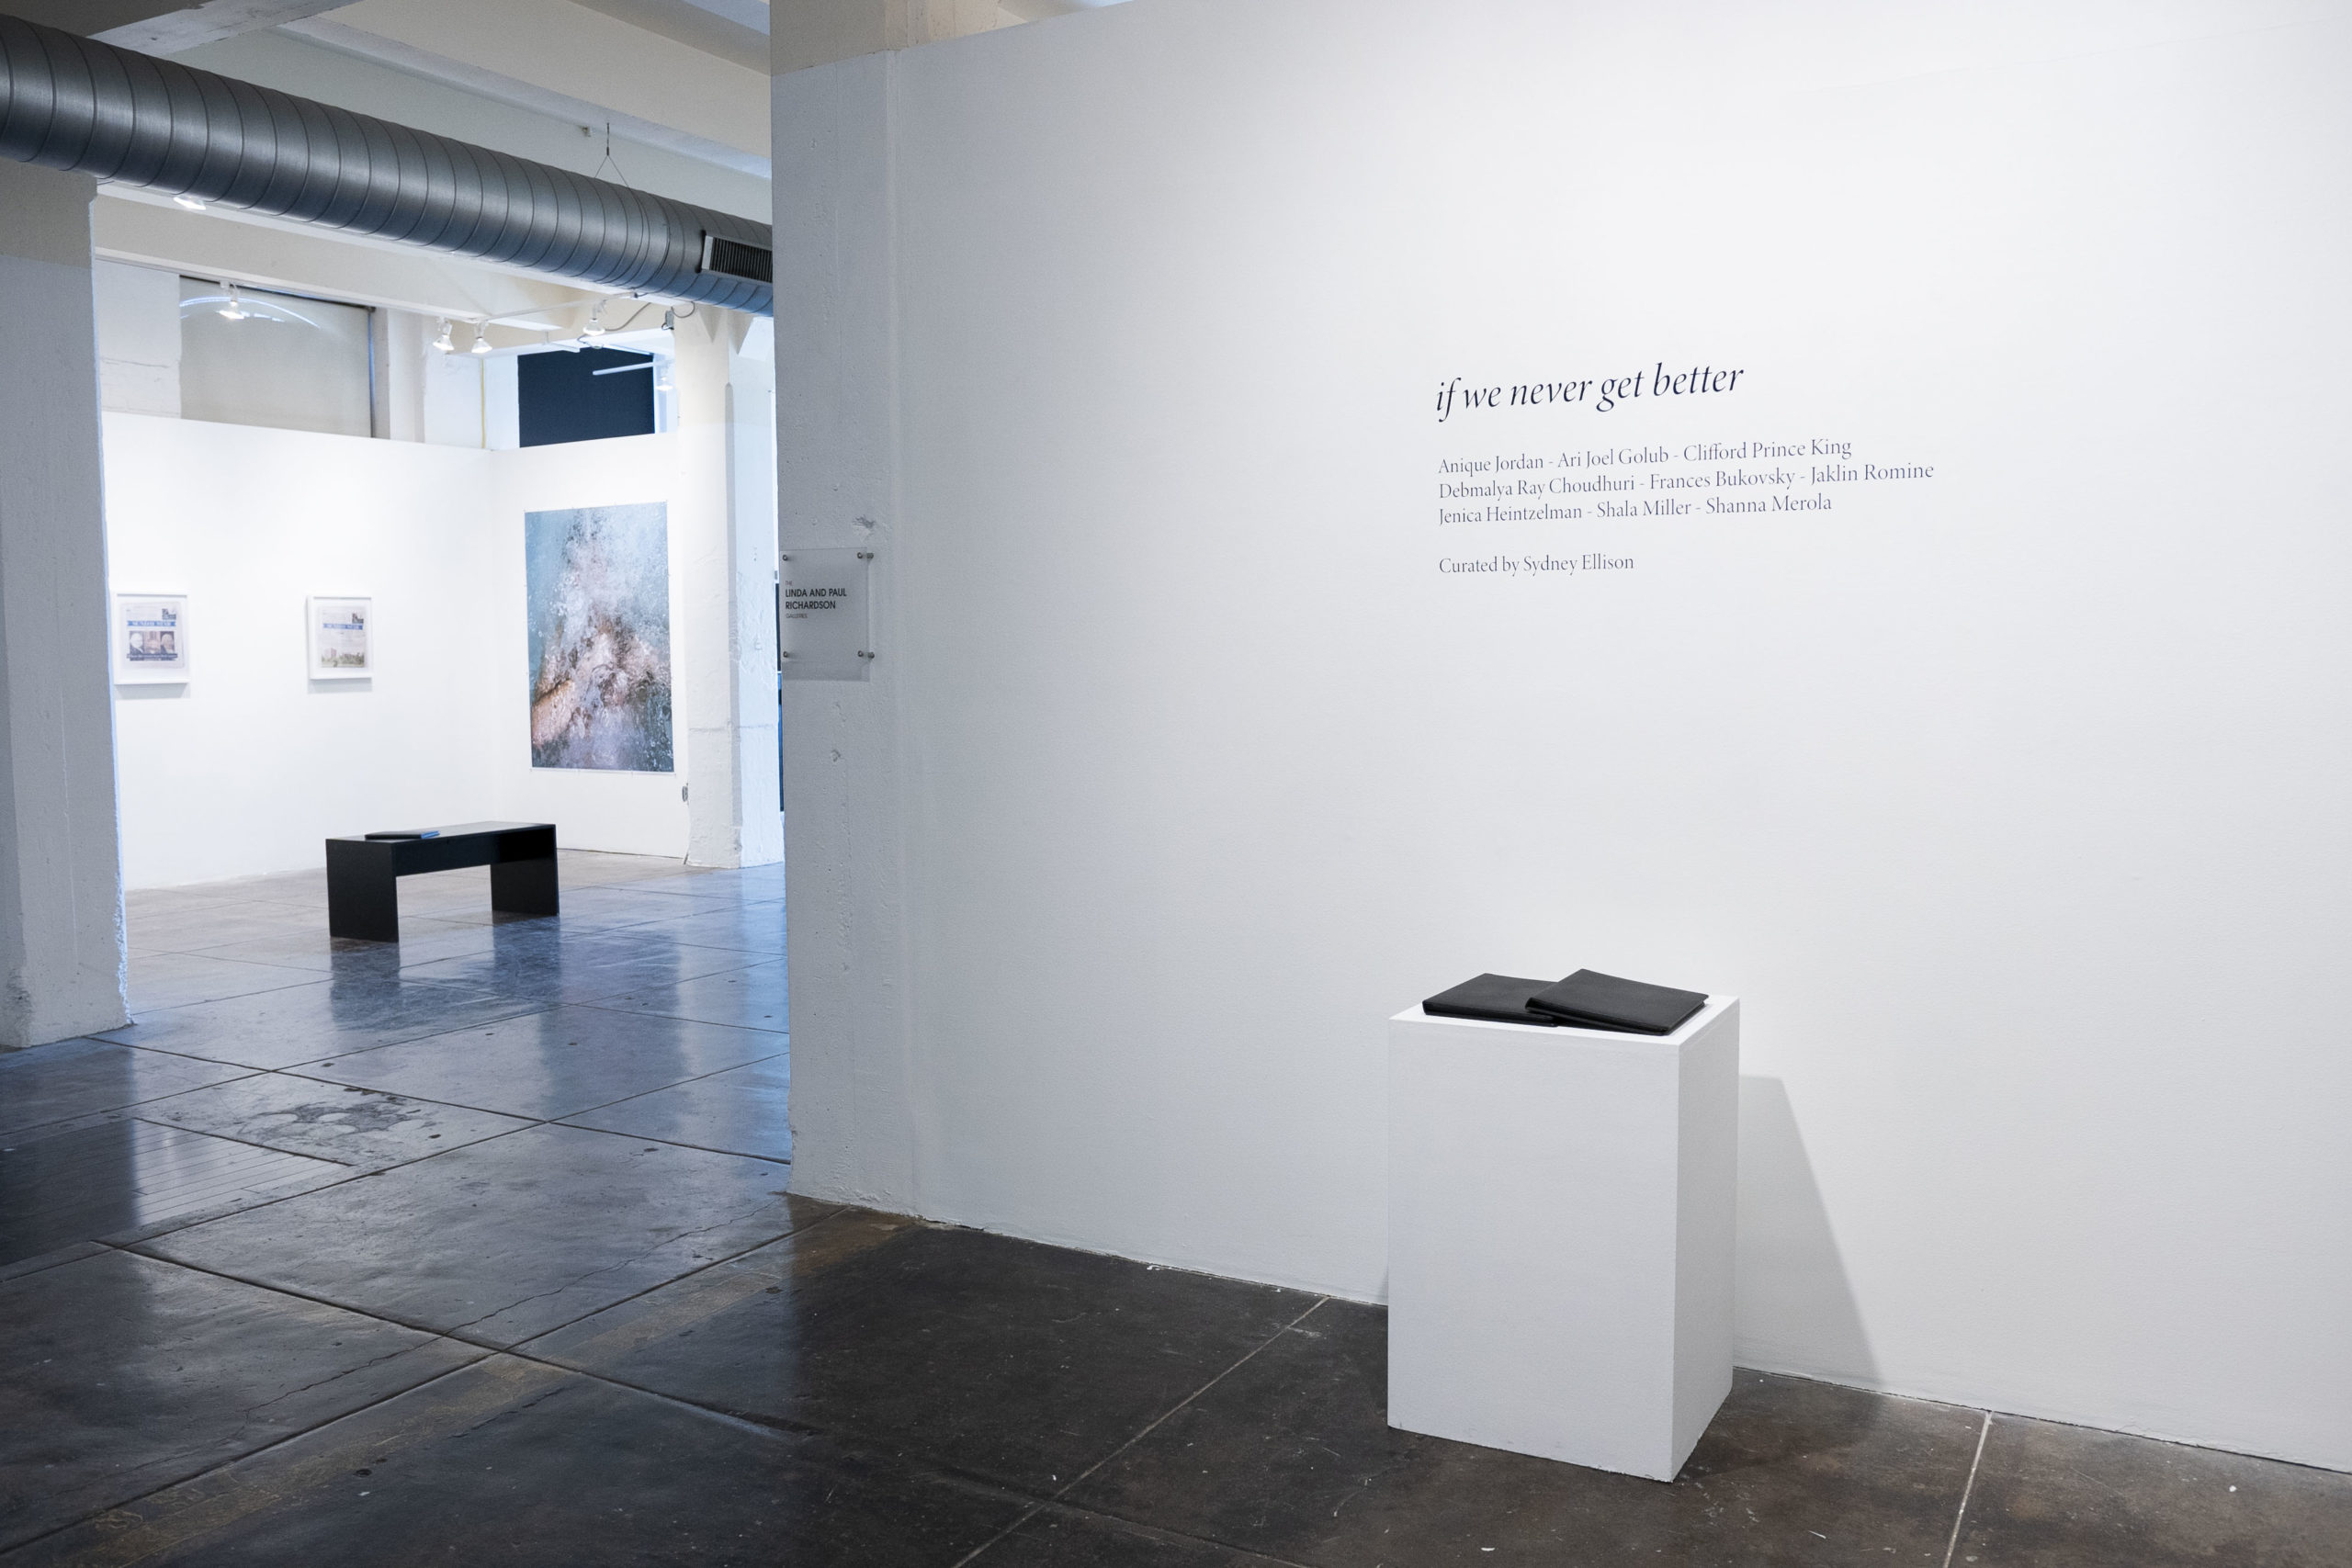 An image of the exhibition at TIILT Institute. The artist statement is on the wall with a white podium and binder beneath it.